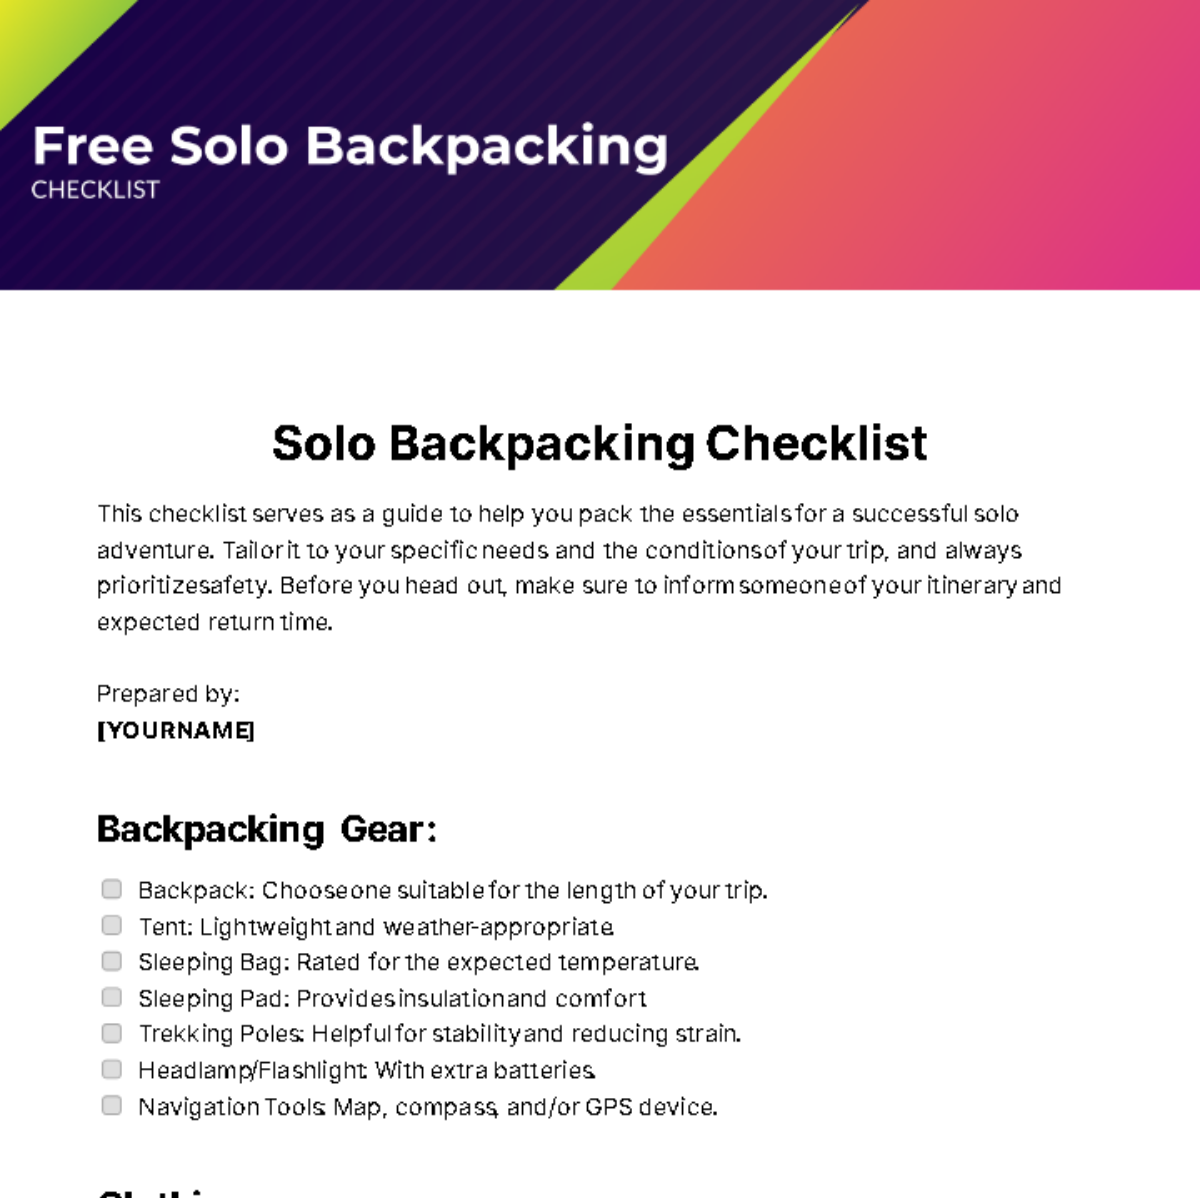 Free Solo Backpacking Checklist Template